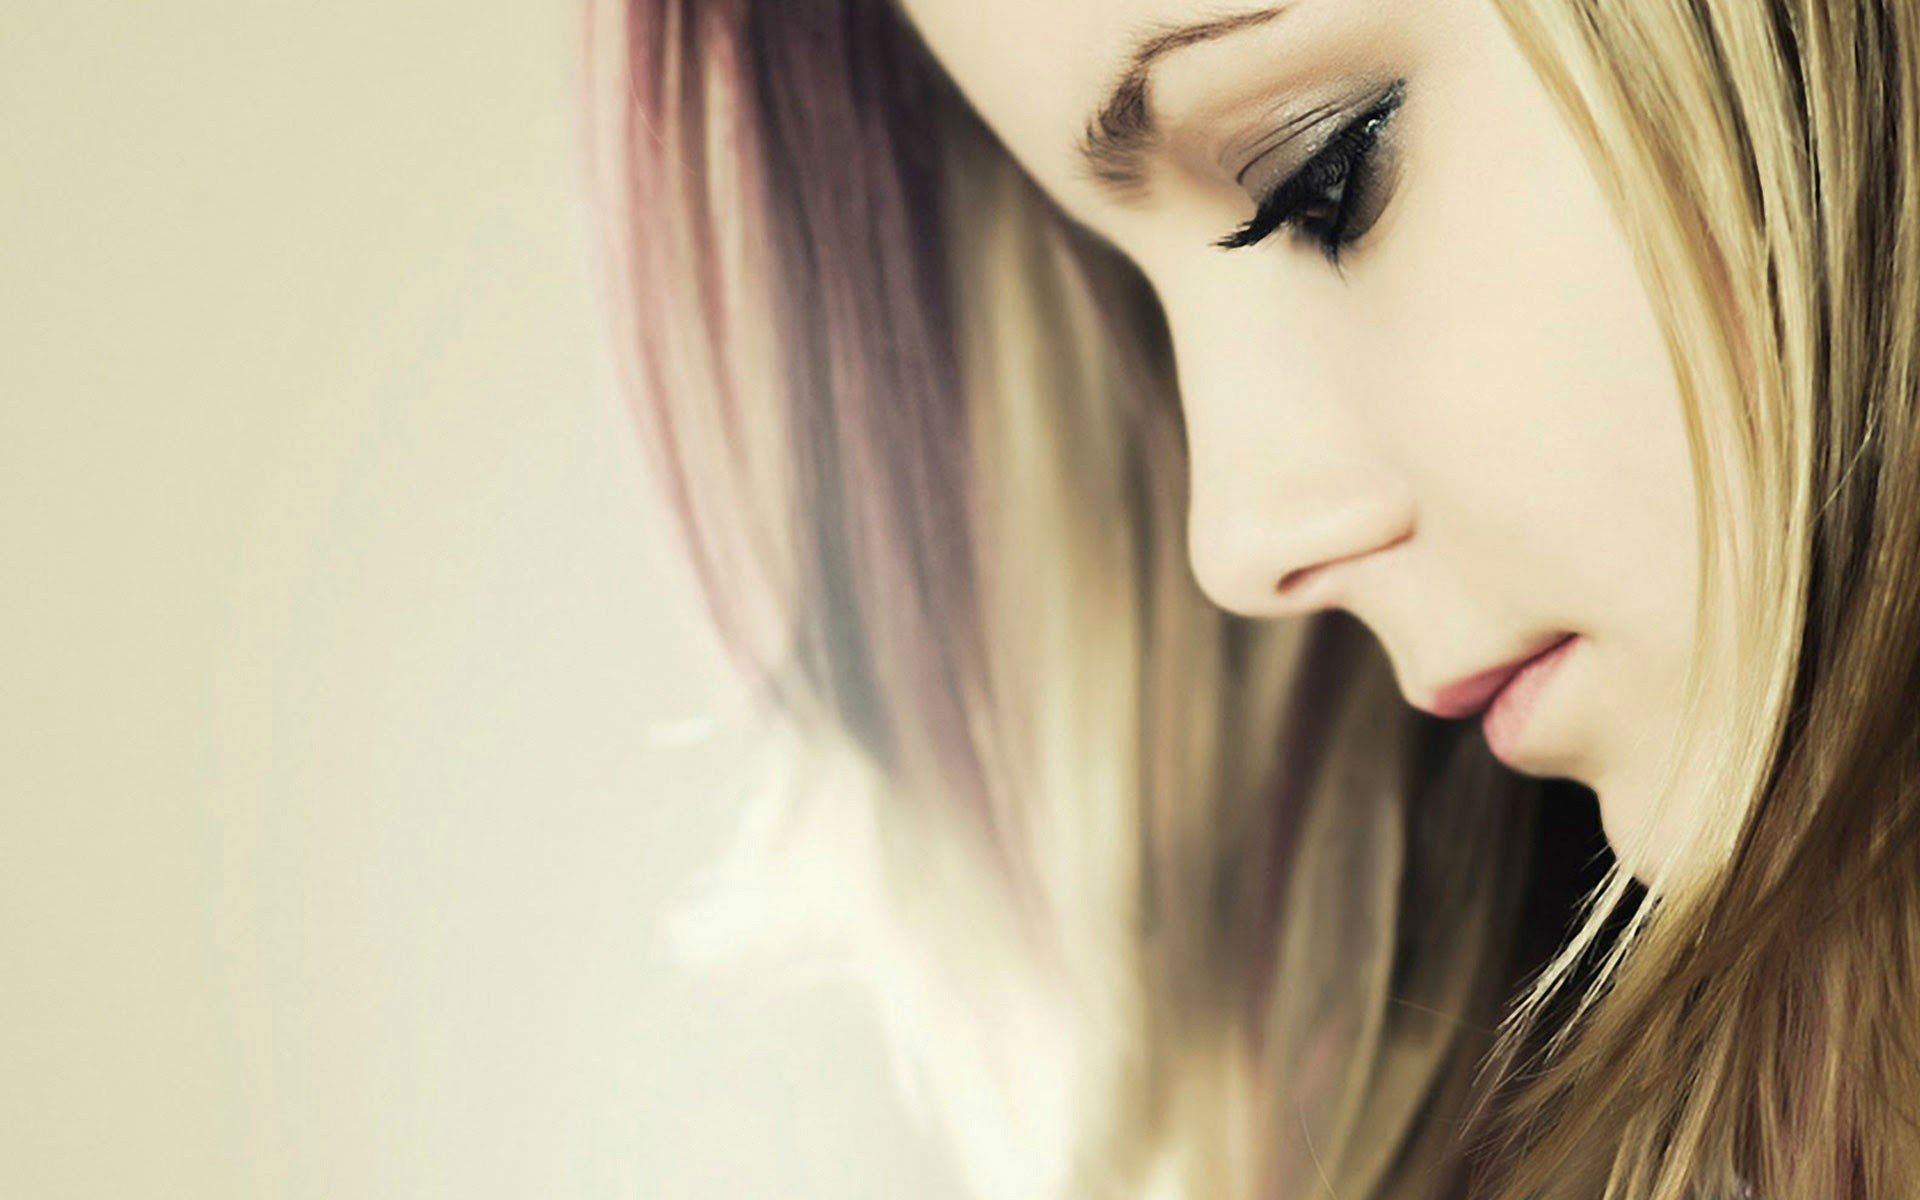 lonely, Mood, Sad, Alone, Sadness, Emotion, People, Loneliness, Solitude, Sorrow, Blonde, Girl, Face Wallpaper